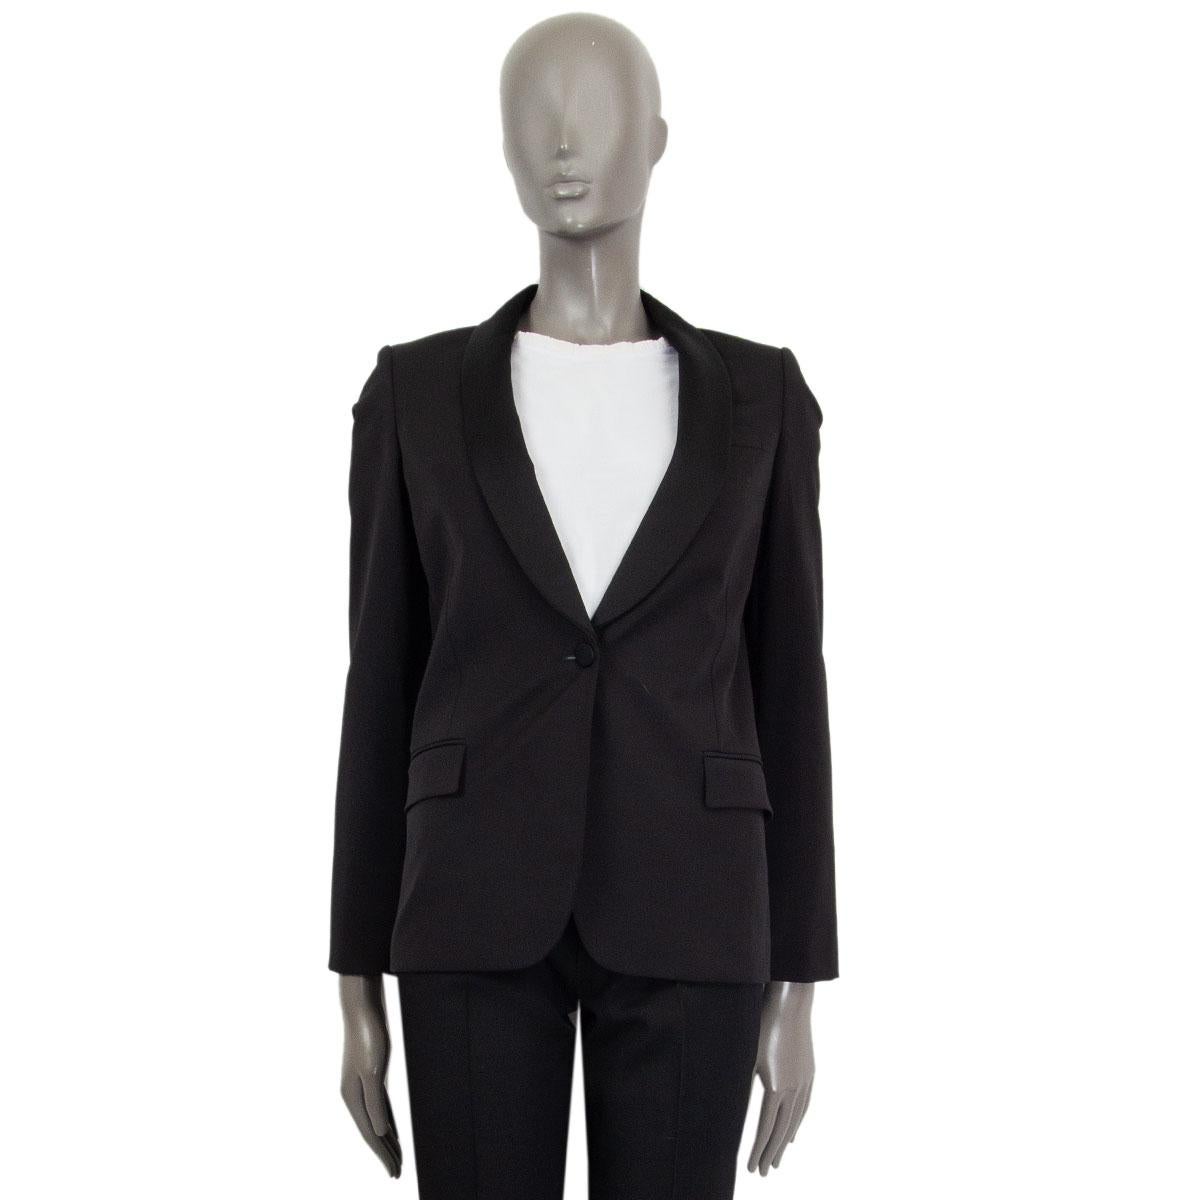 100% authentic Gucci Tuxedo blazer jacket in black wool (94%), silk (4%) and elastane (2%). Has two flap pockets at front and is lined in silk (90%) and (10%). Has been worn and is in excellent condition. 

Tag Size	42
Size	M
Shoulder Width	38cm